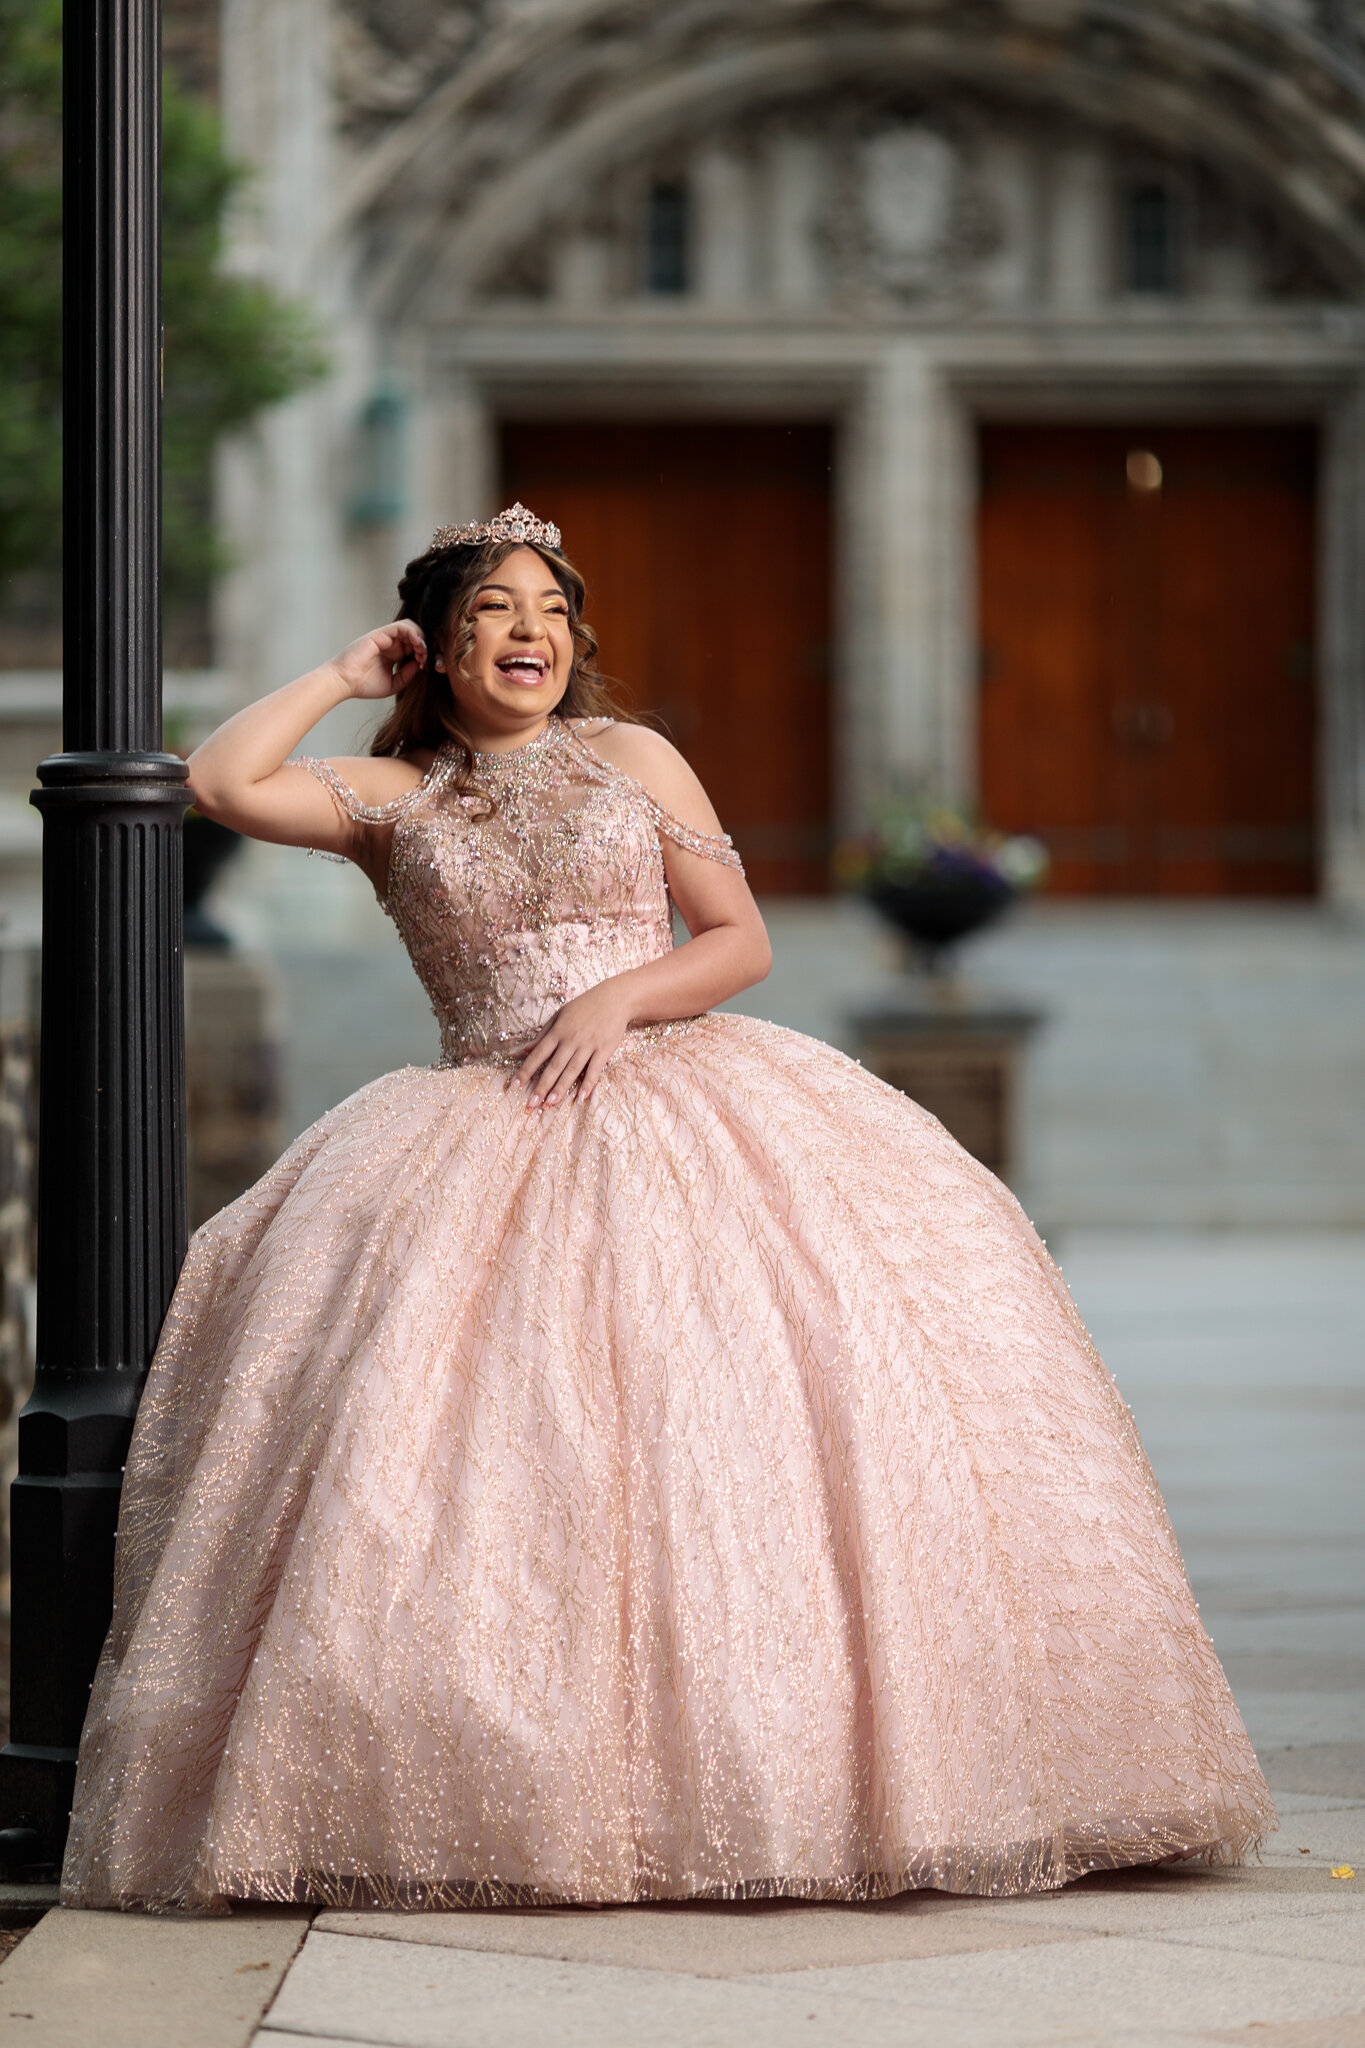 Alana-Quince-Session-Garcia-Photography-9213.jpg